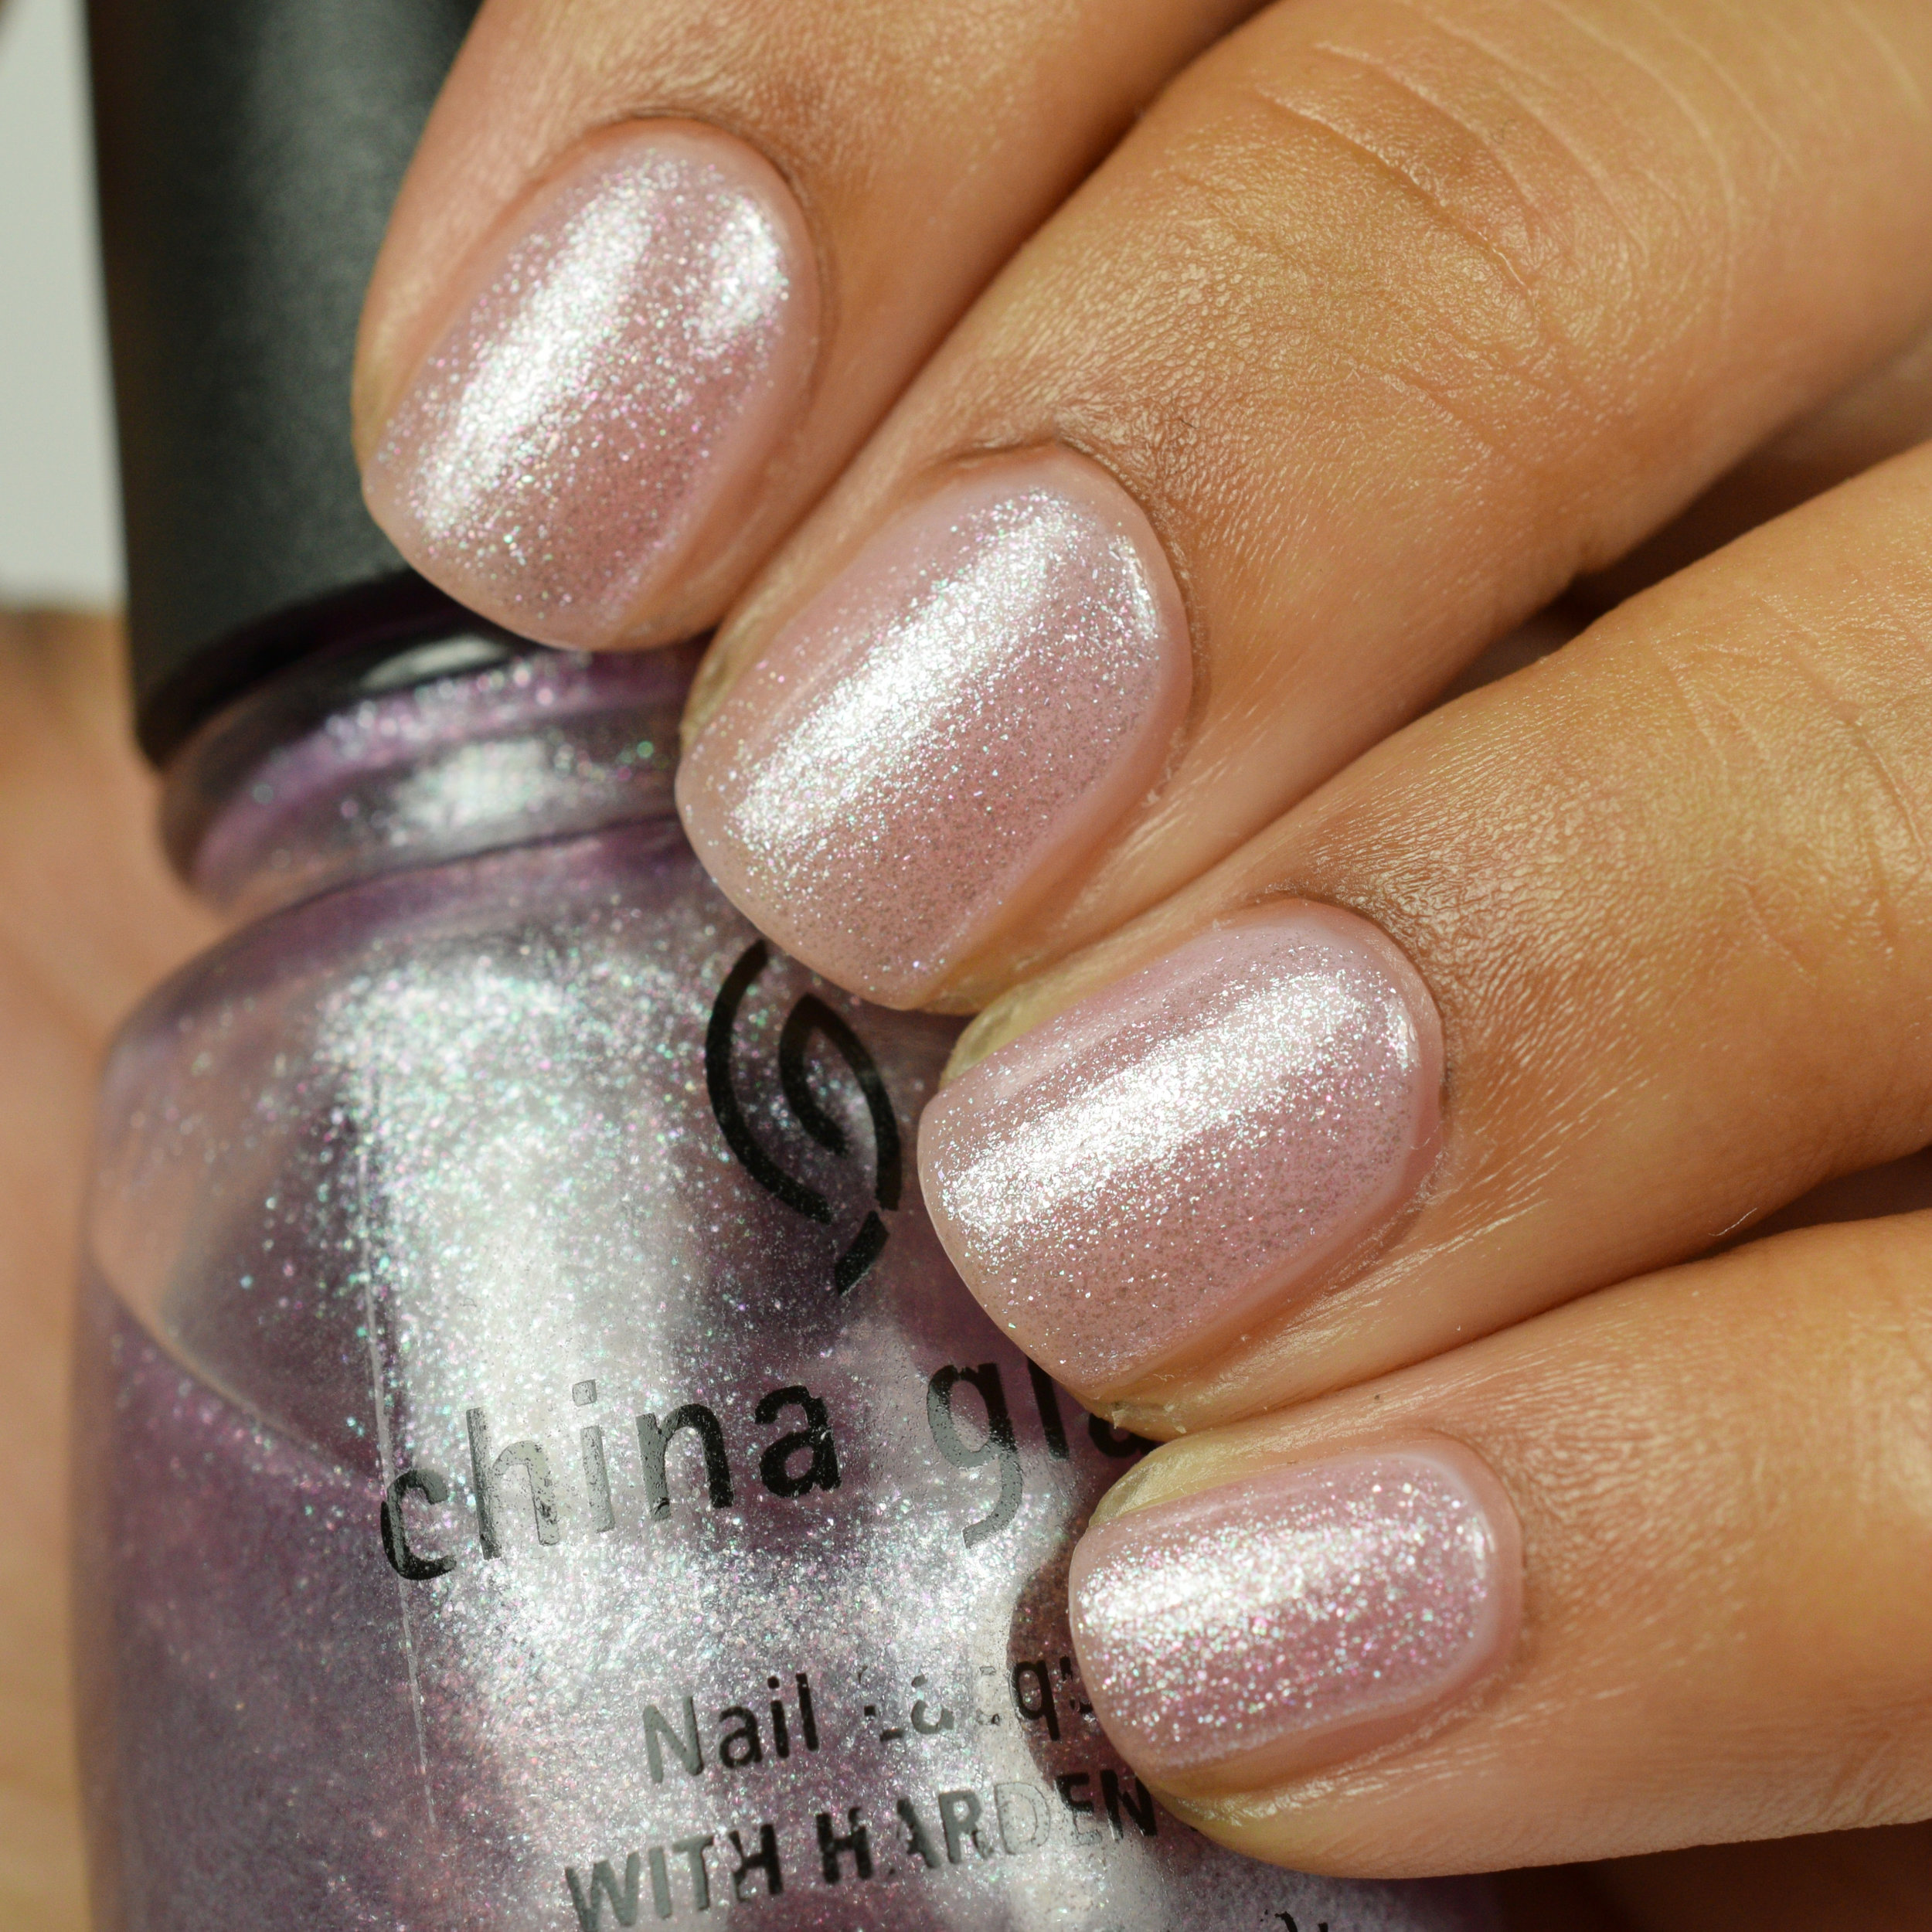 China Glaze Happily Ever After over OPI Care To Danse.jpg